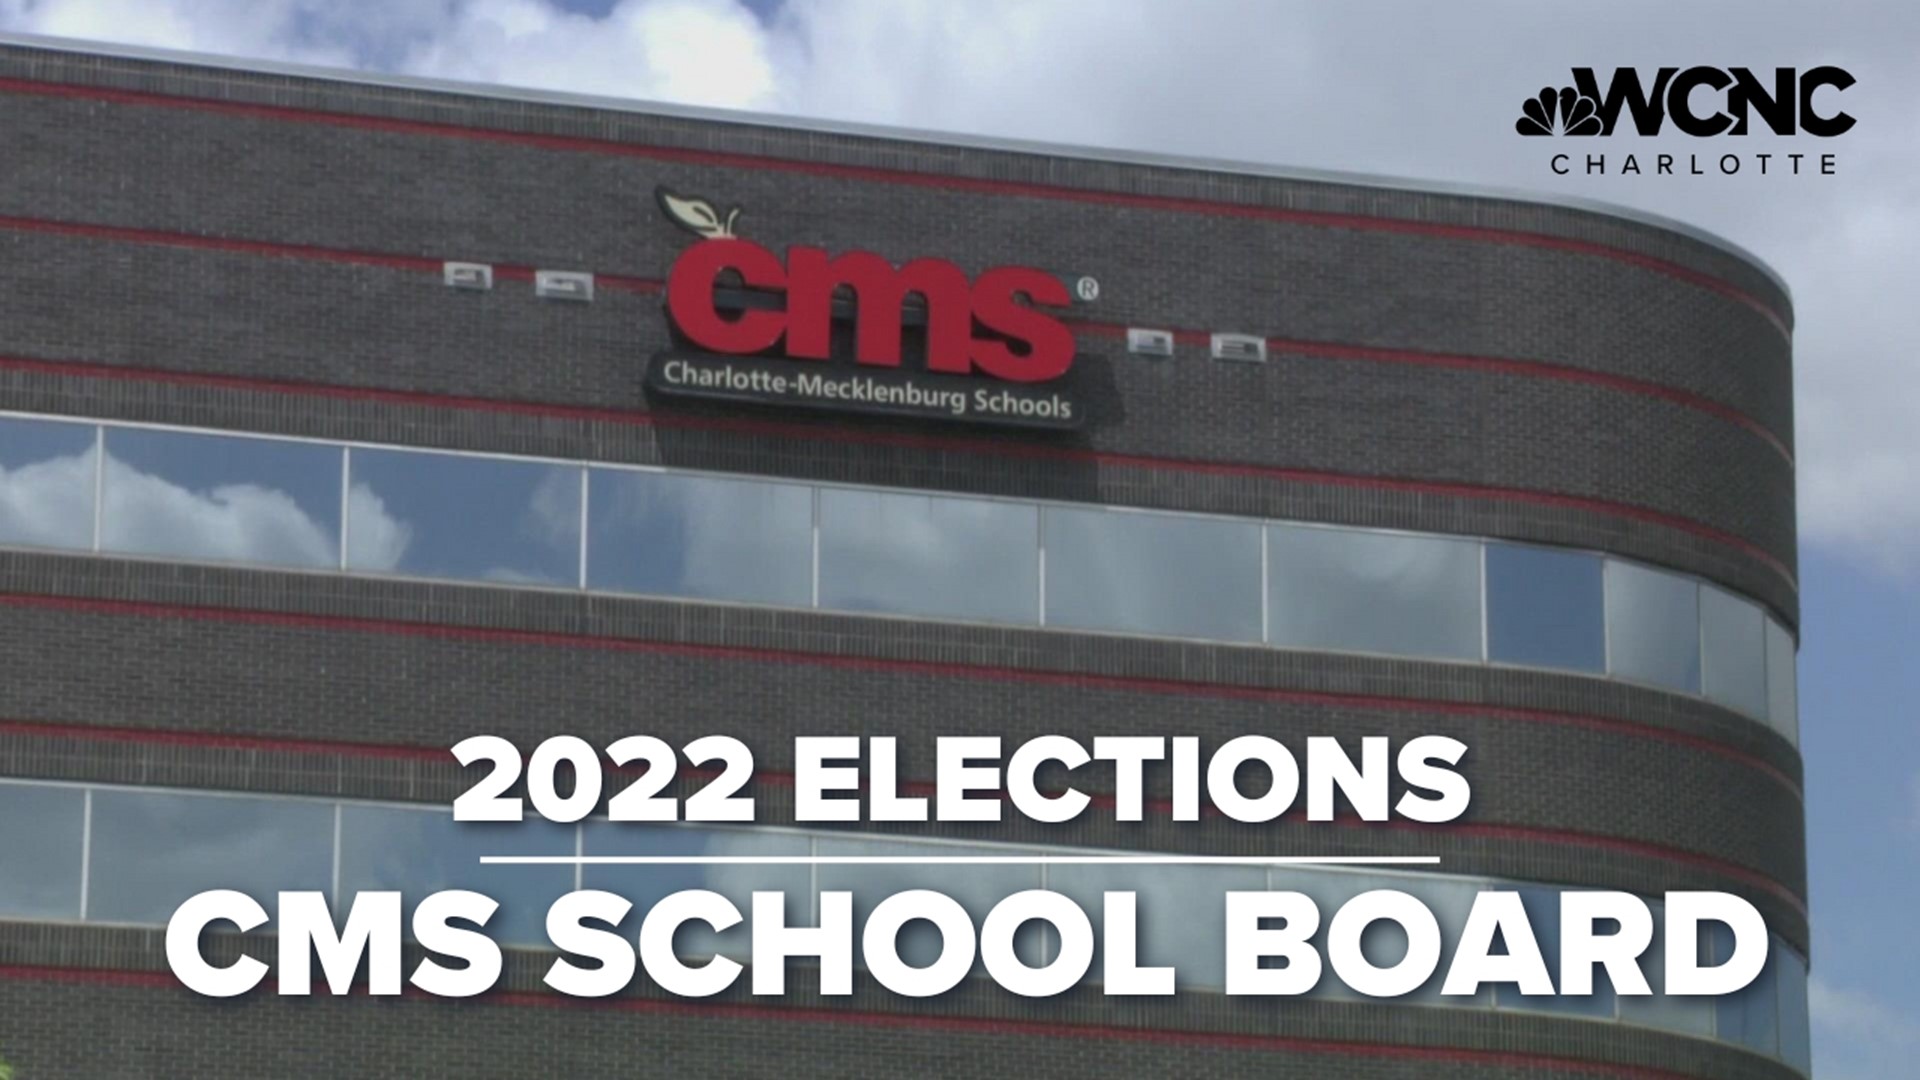 Candidates focused on school safety, teacher retention, district budgeting and the new superintendent search during their campaigns.